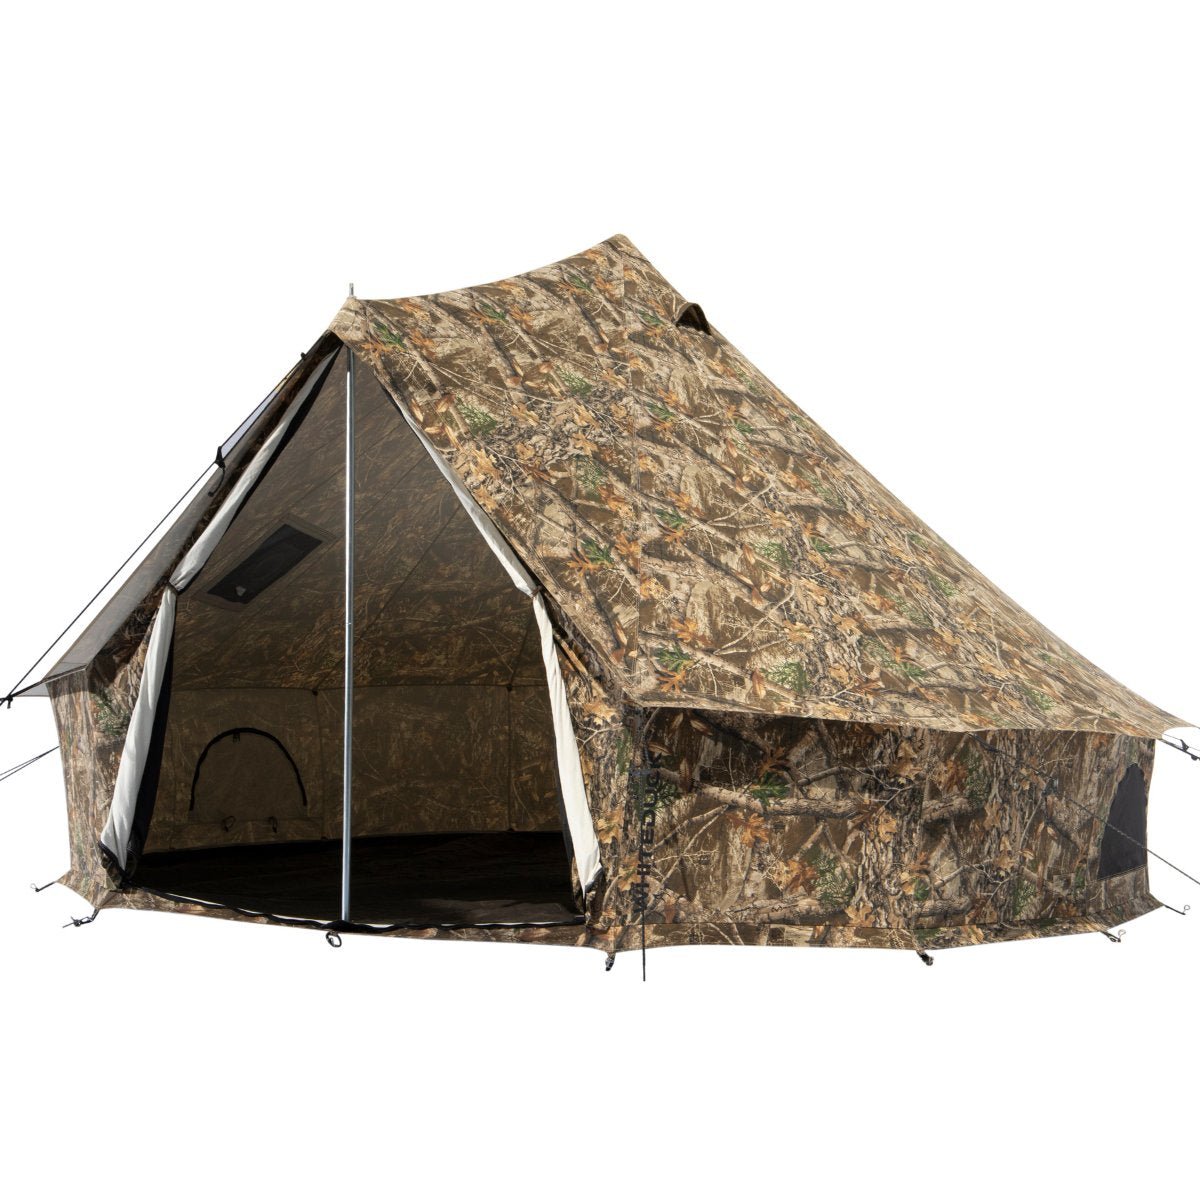 White Duck Outdoors - 13' Regatta Bell Tent - Angler's Pro Tackle & Outdoors